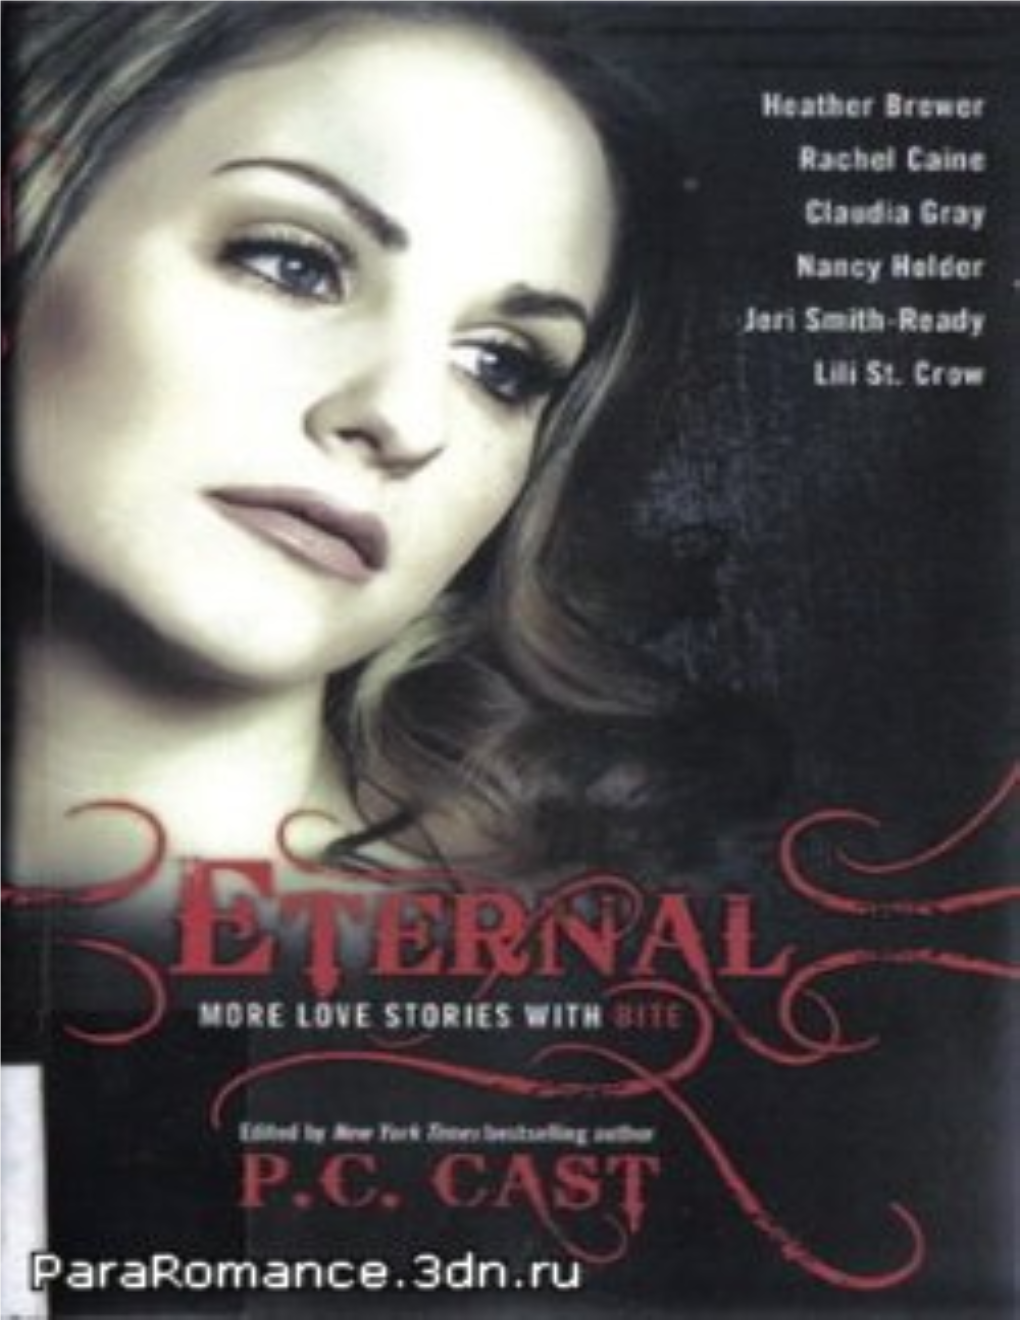 Eternal: More Love Stories with Bite